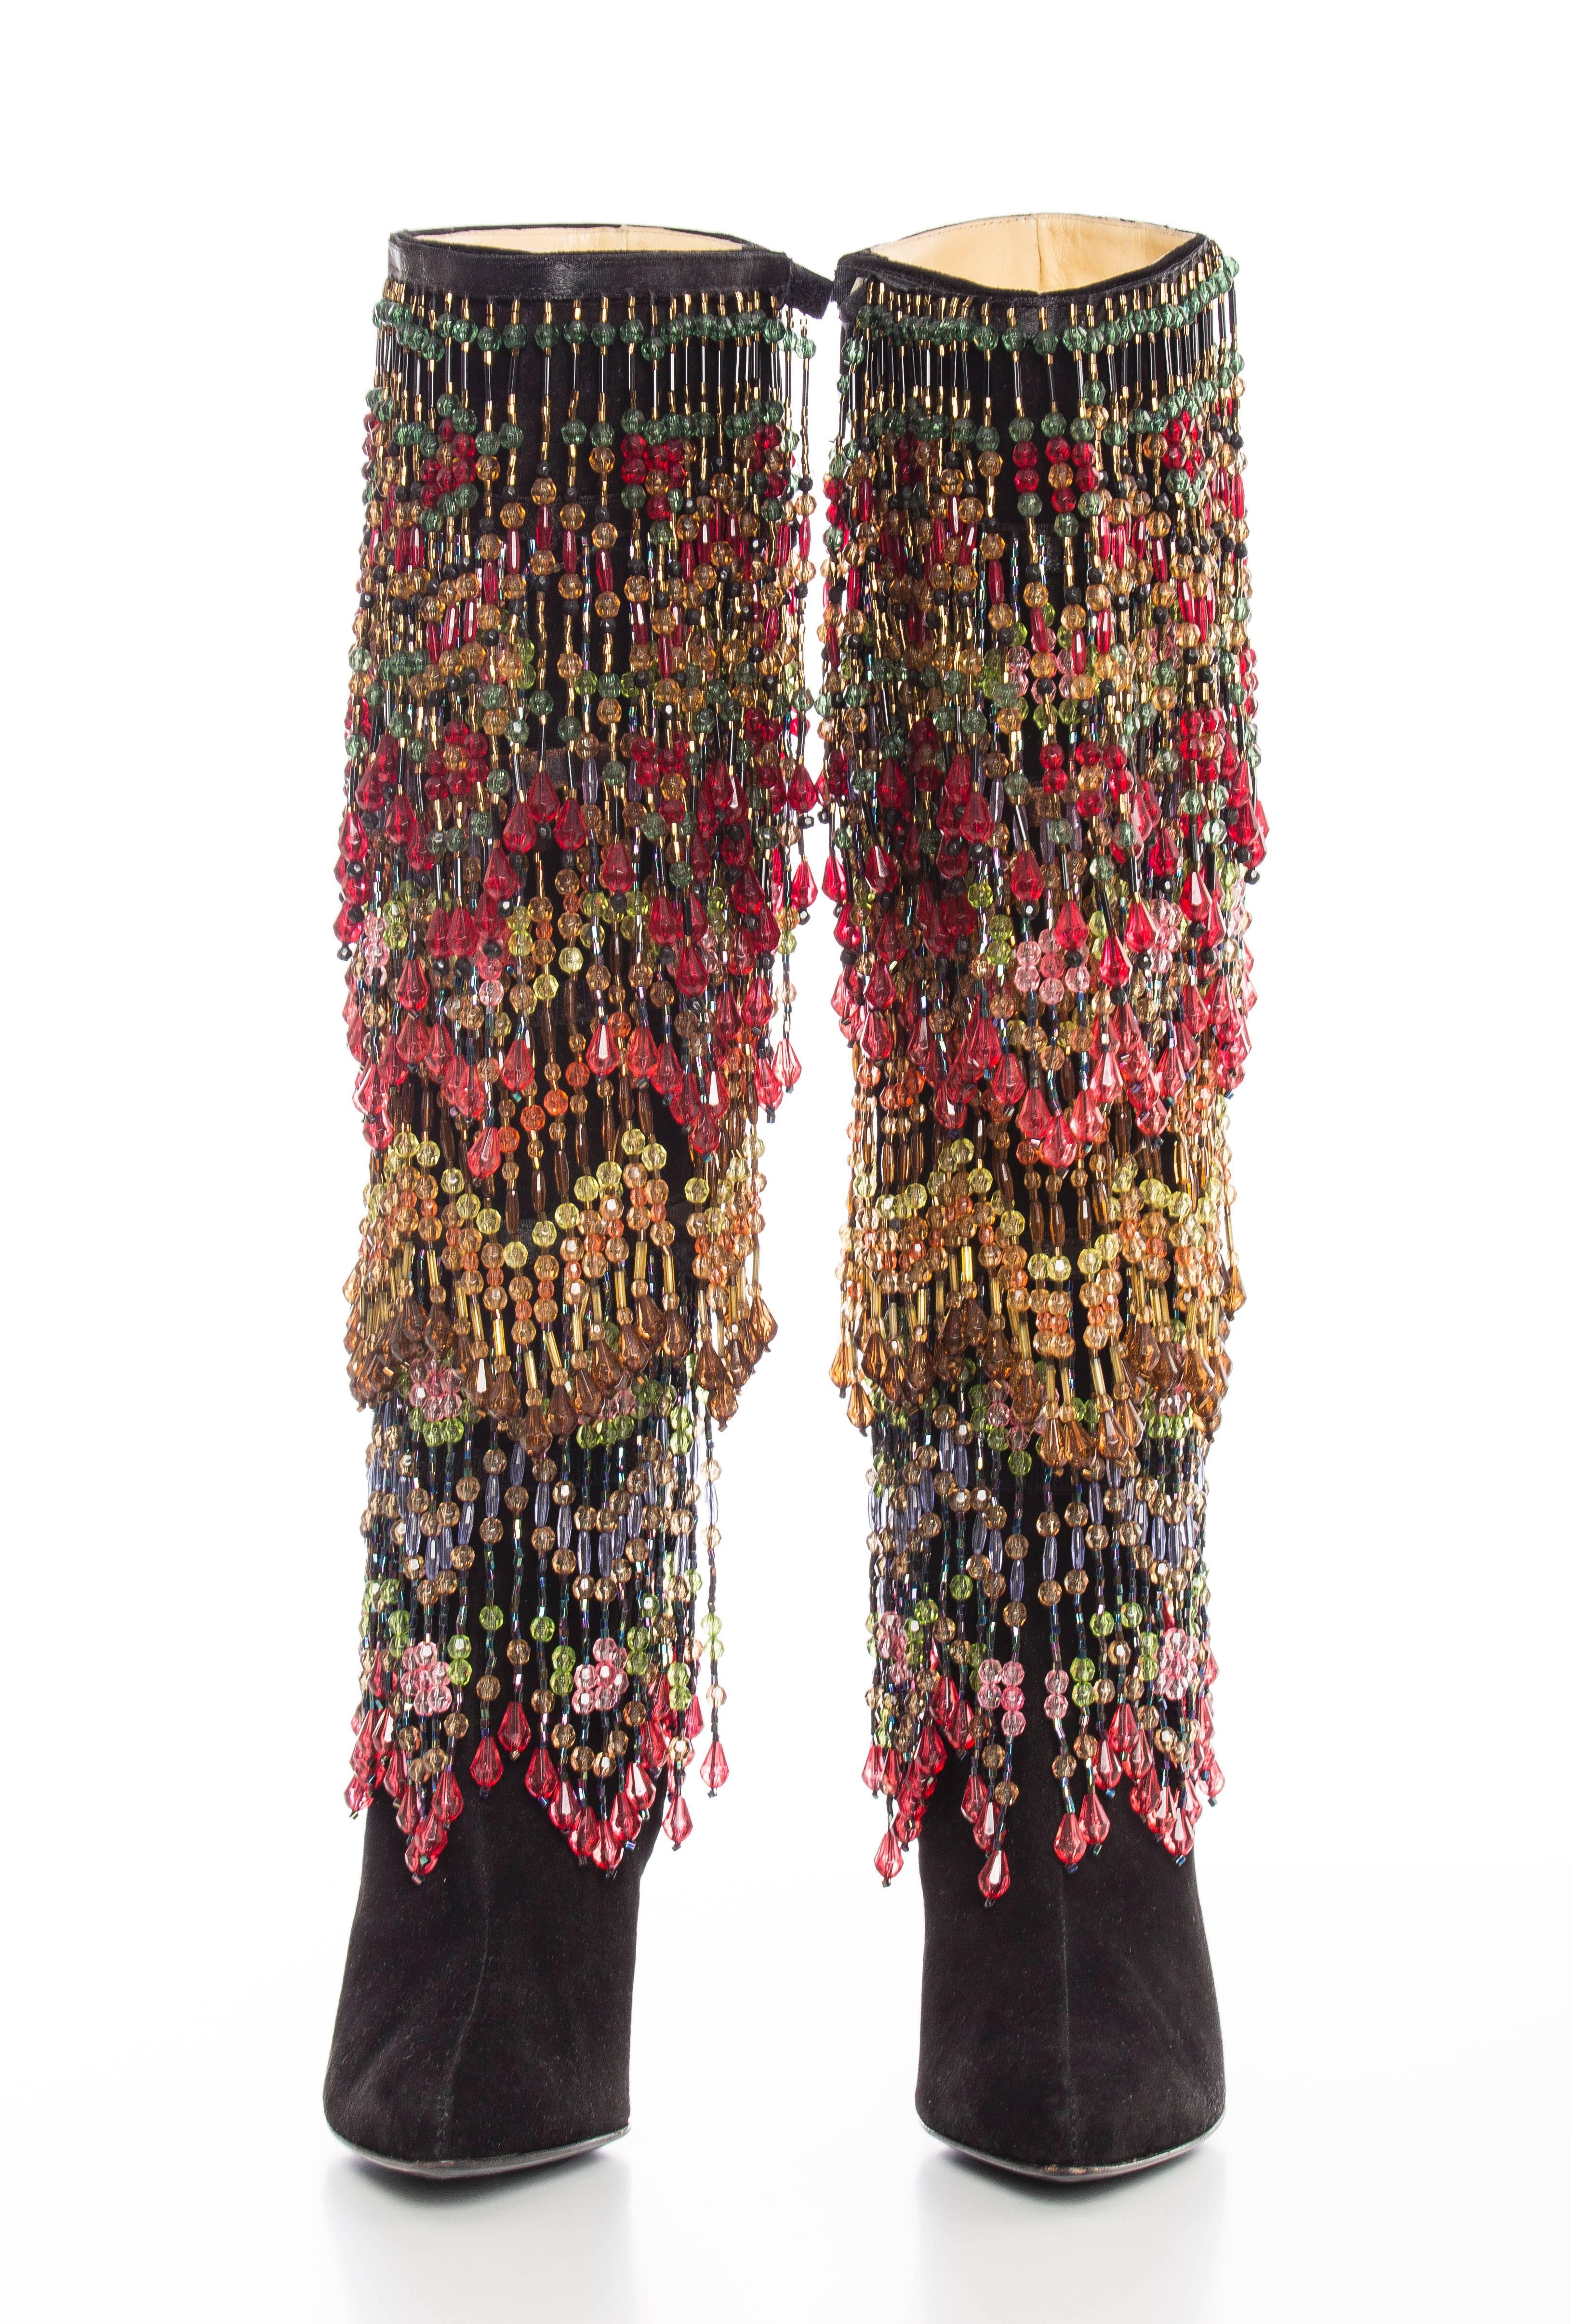 Todd Oldham, Fall 1997, black suede boots with detachable polychrome beads.

EU 37.5
US 7.5

4